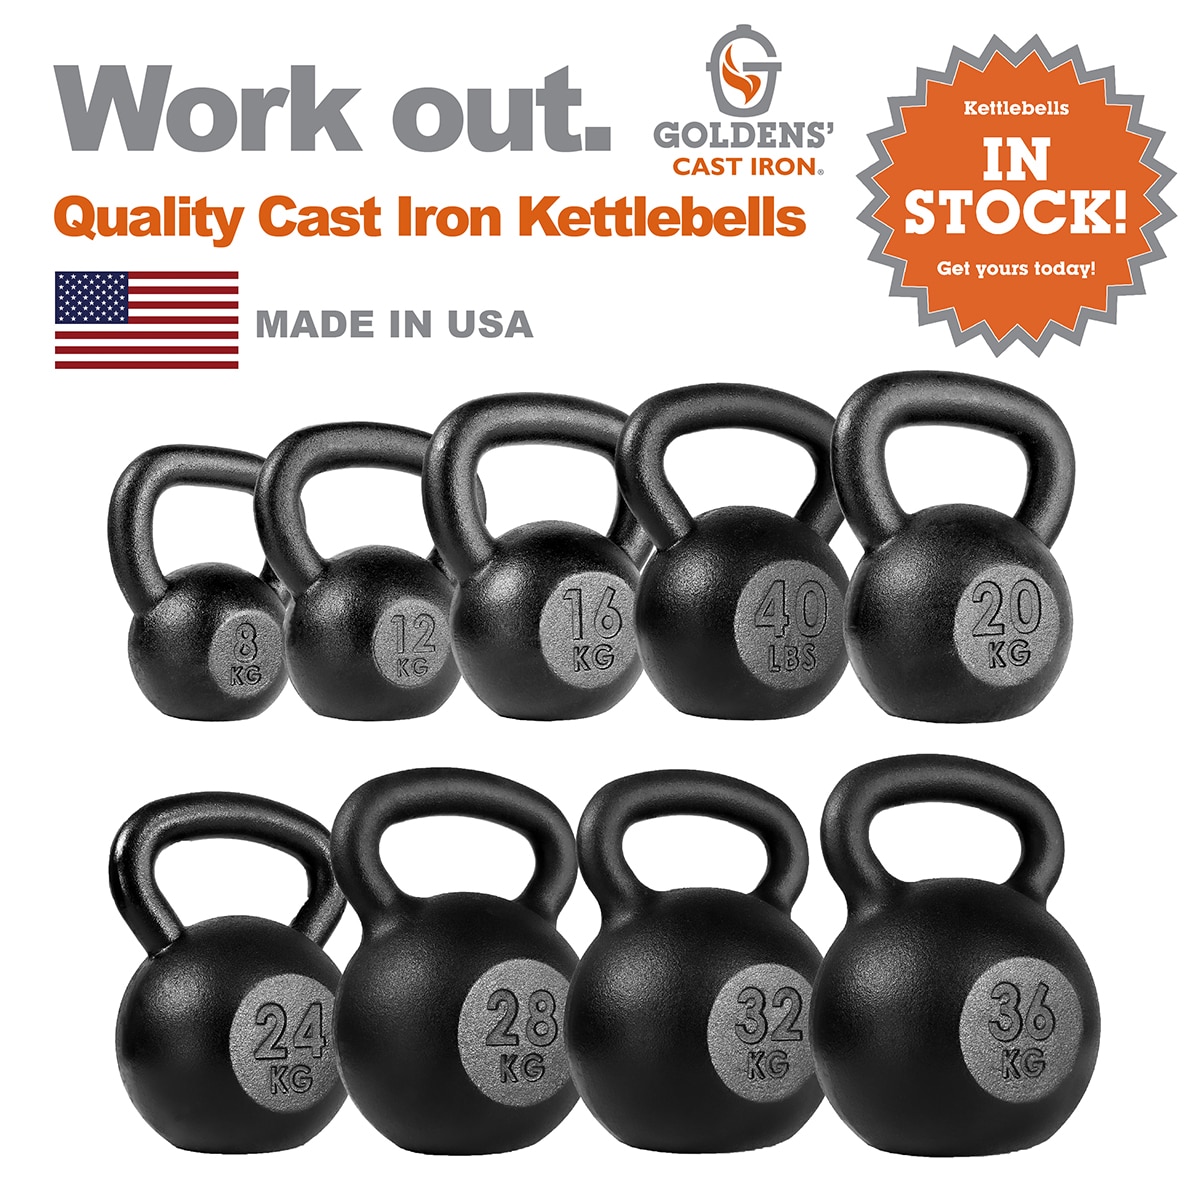 Cast Iron | Kettlebells | Quality | In Stock | Made in USA!